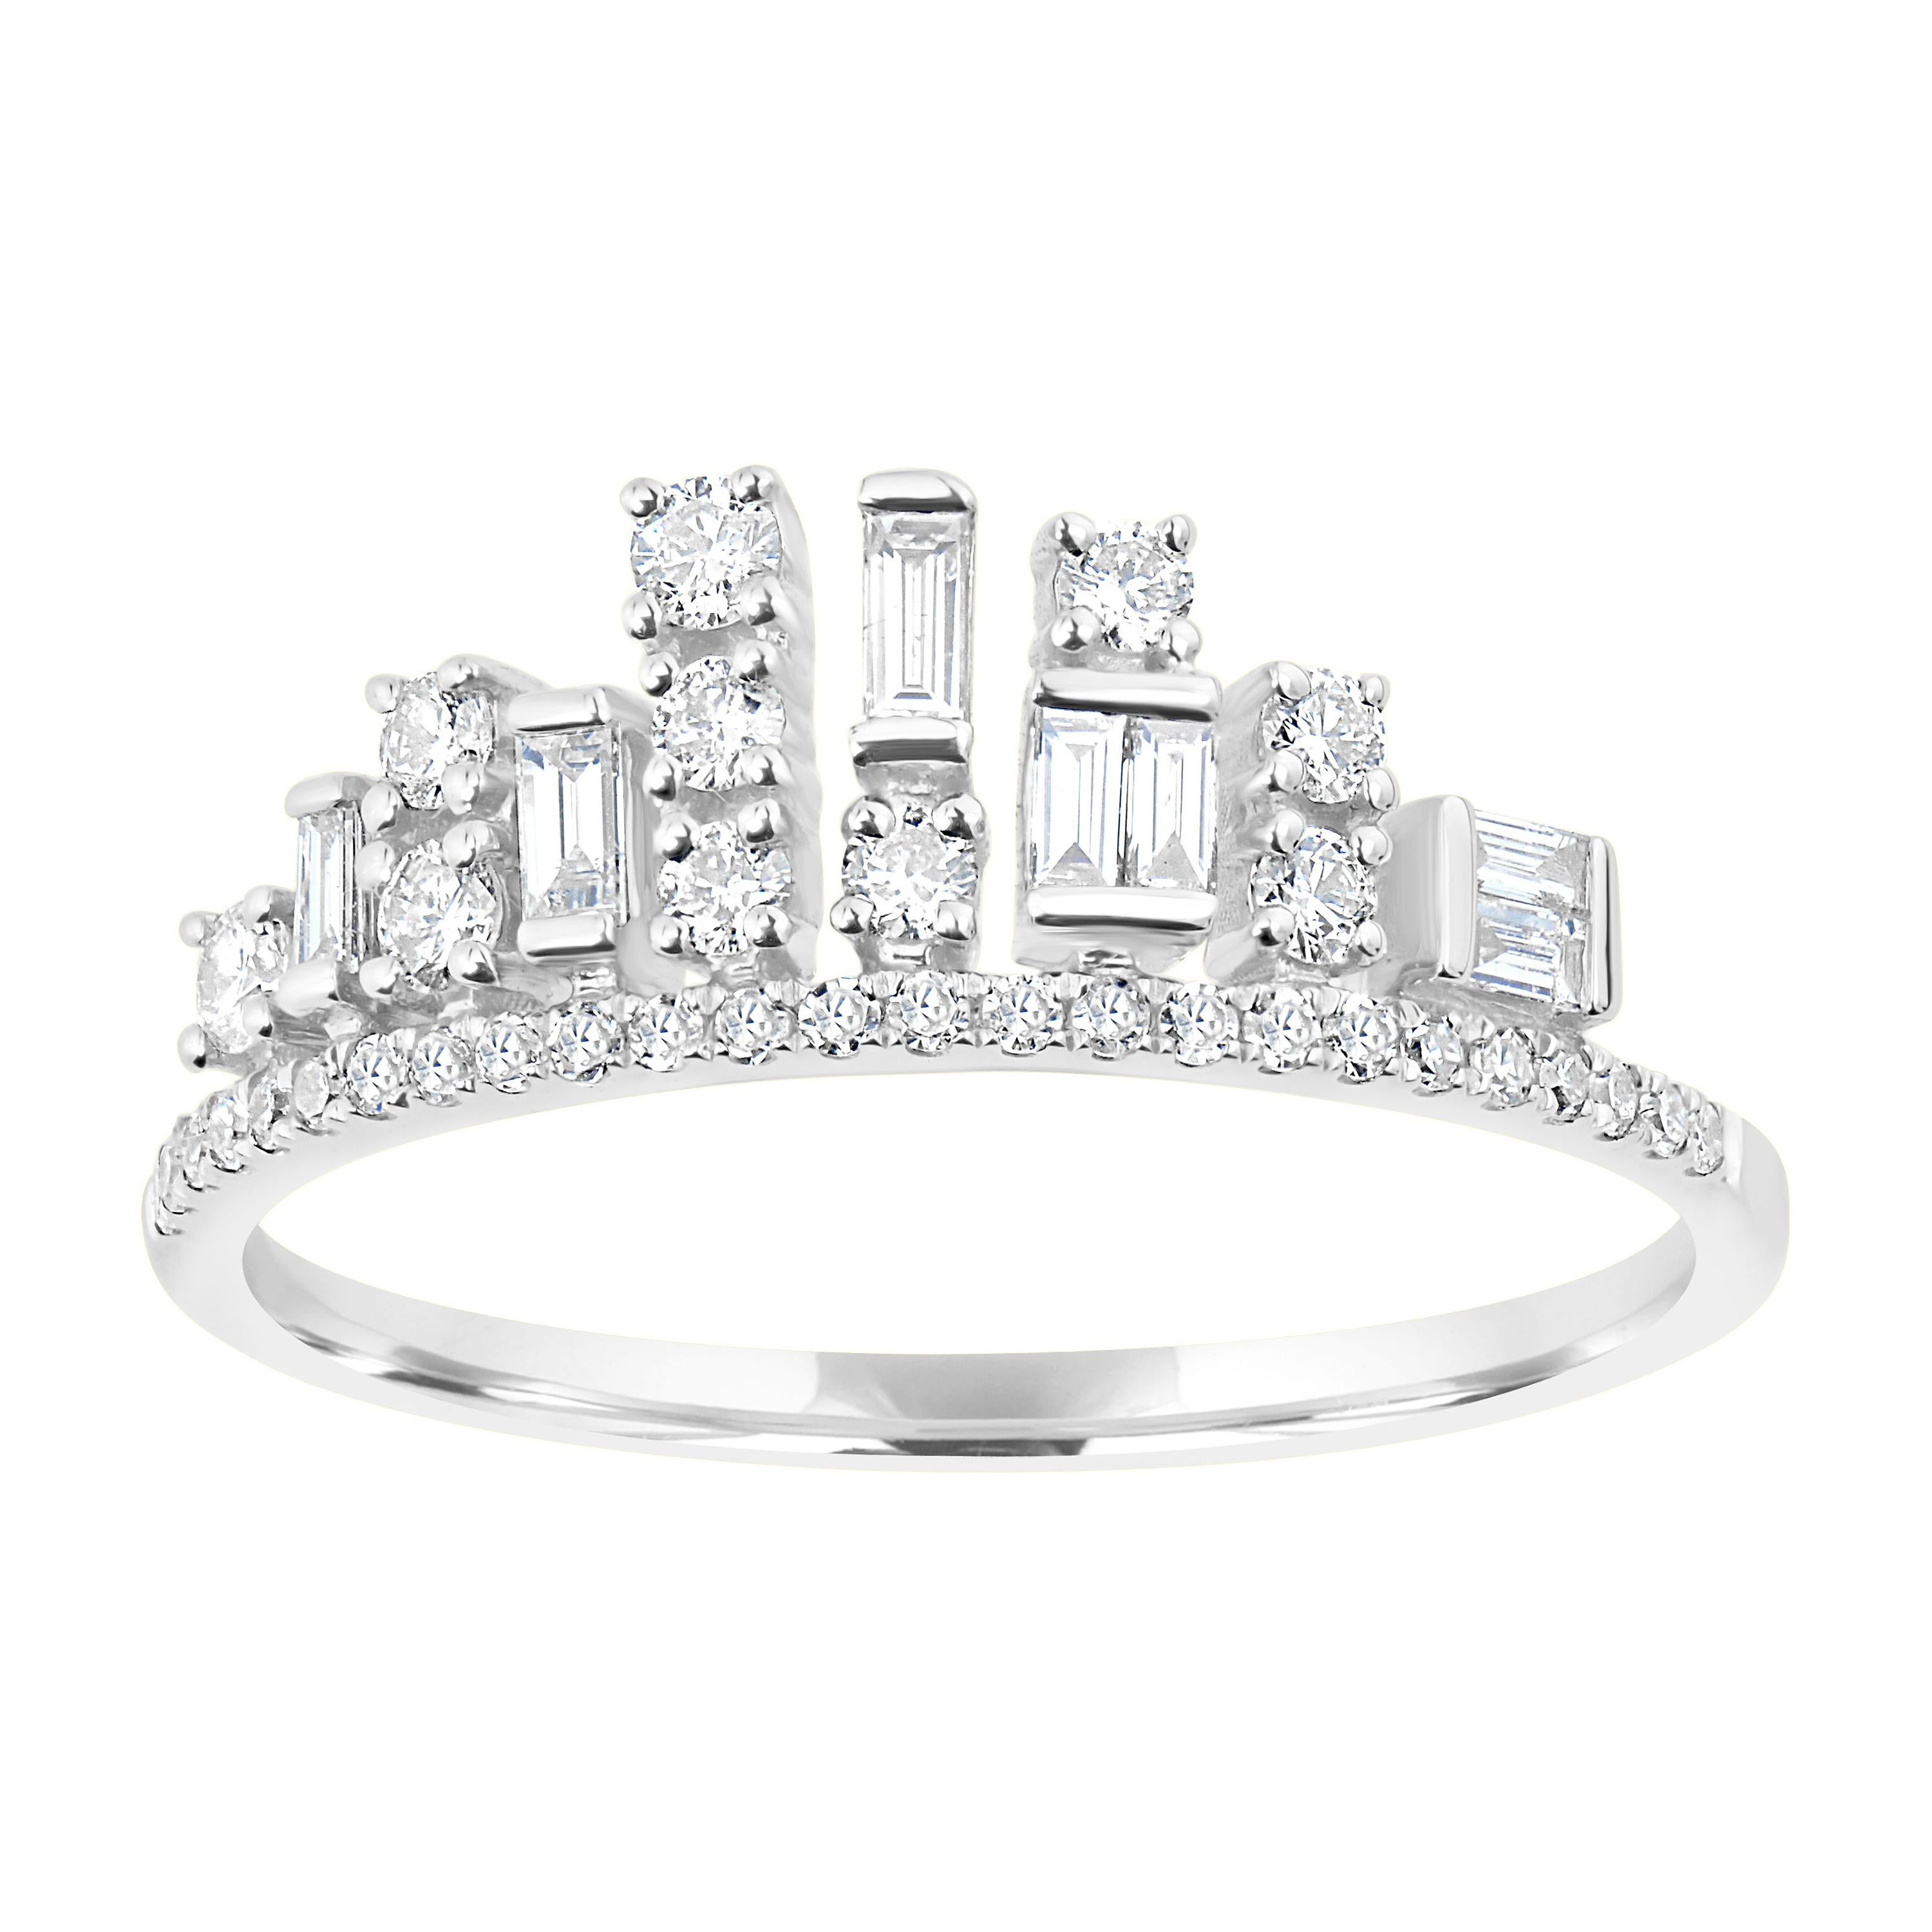 Luxle 0.31cttw Baguette and Round Diamond Crown Ring in 18k White Gold